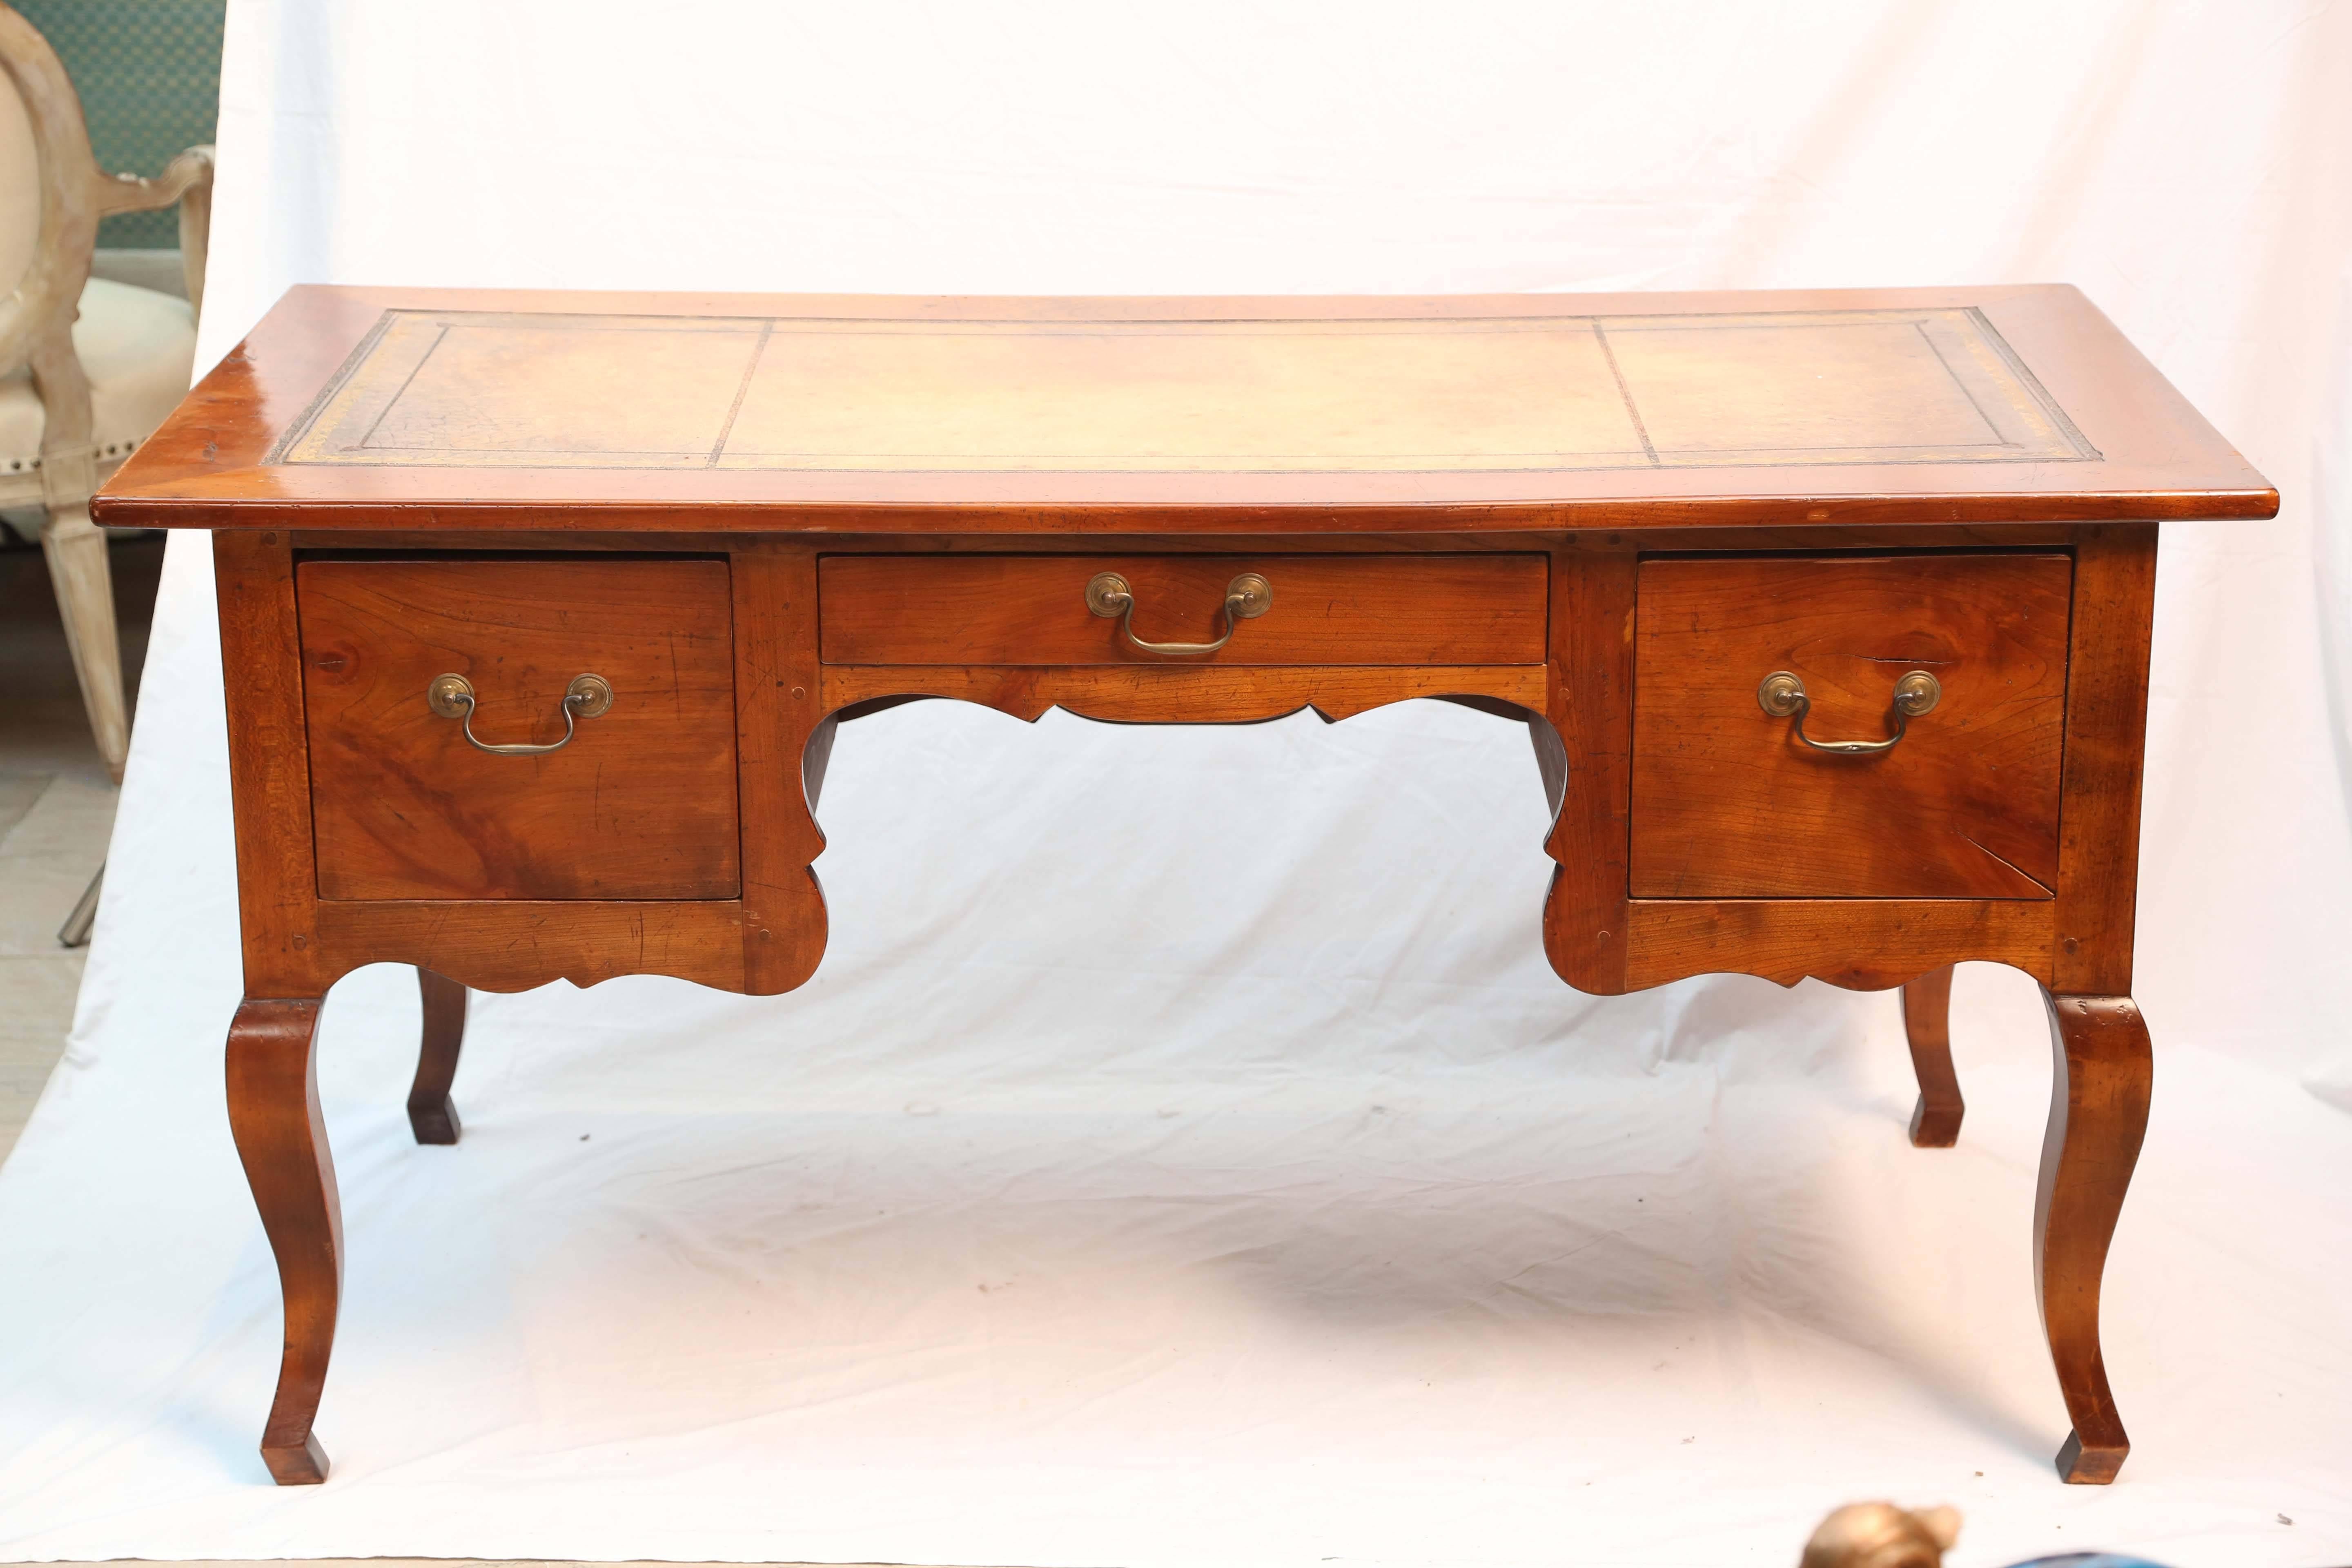 Rich patina and wonderful scale - graceful and unusual design. The desk is fitted with deep drawers and embossed leather top. Sides and back are paneled.